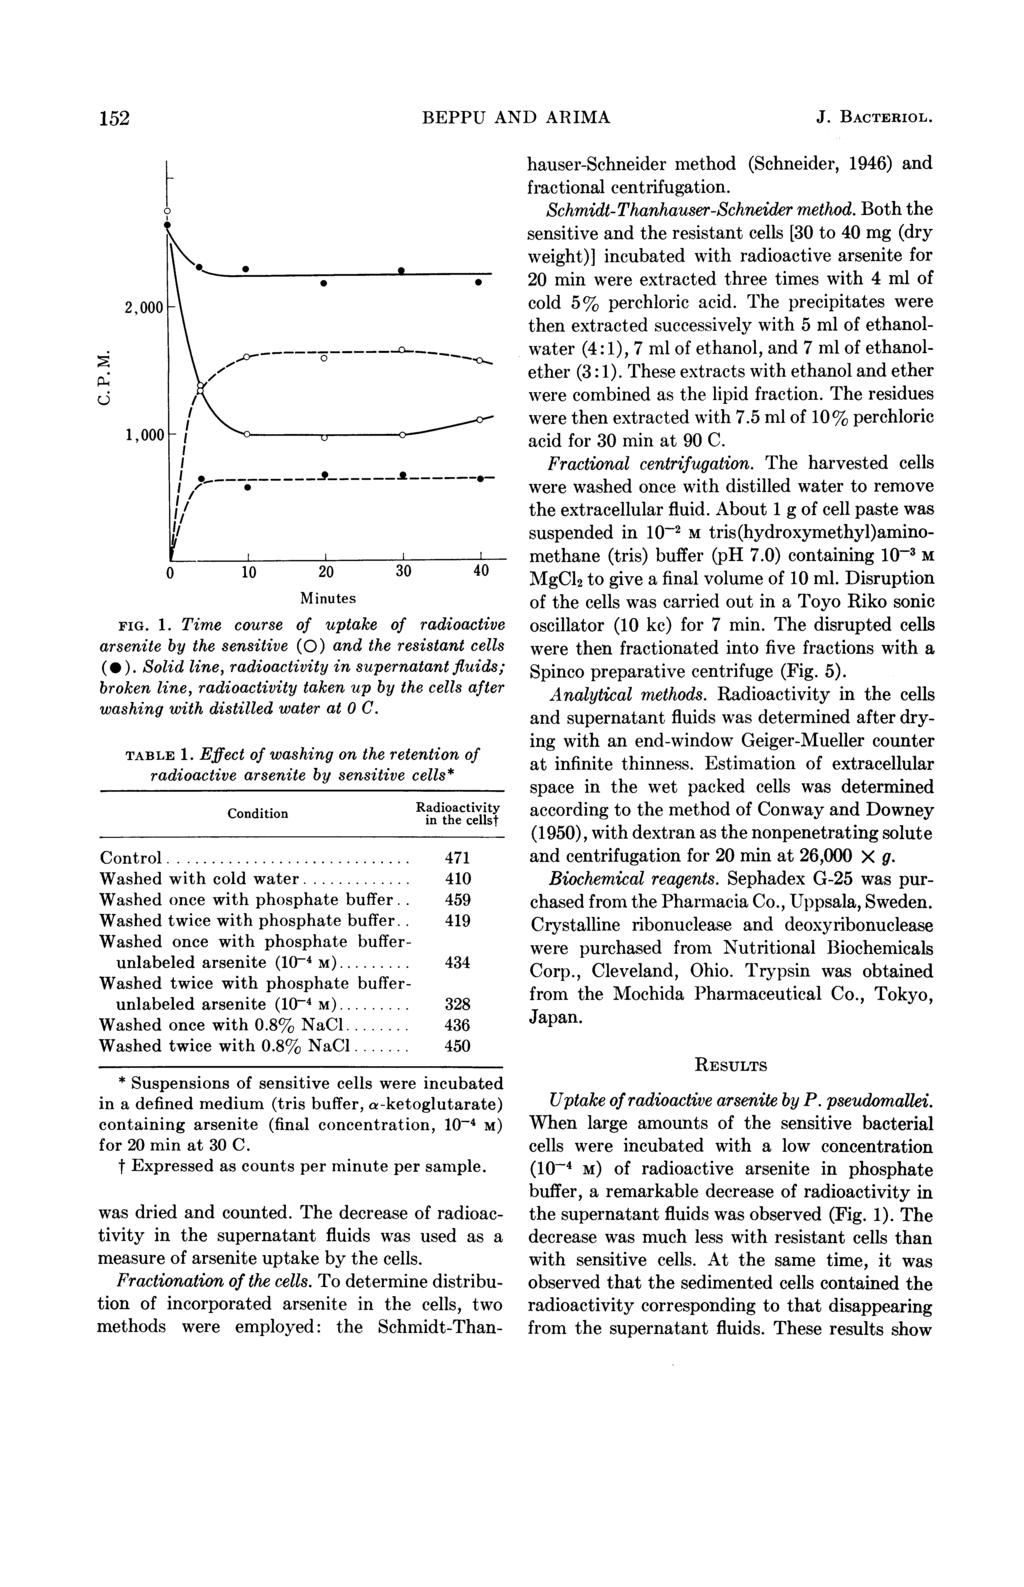 152 BEPPU AND ARIMA J. BACTERIOL. Minutes FIG. 1. Time course of uptake of radioactive arsenite by the sensitive (0) and the resistant cells (* ).